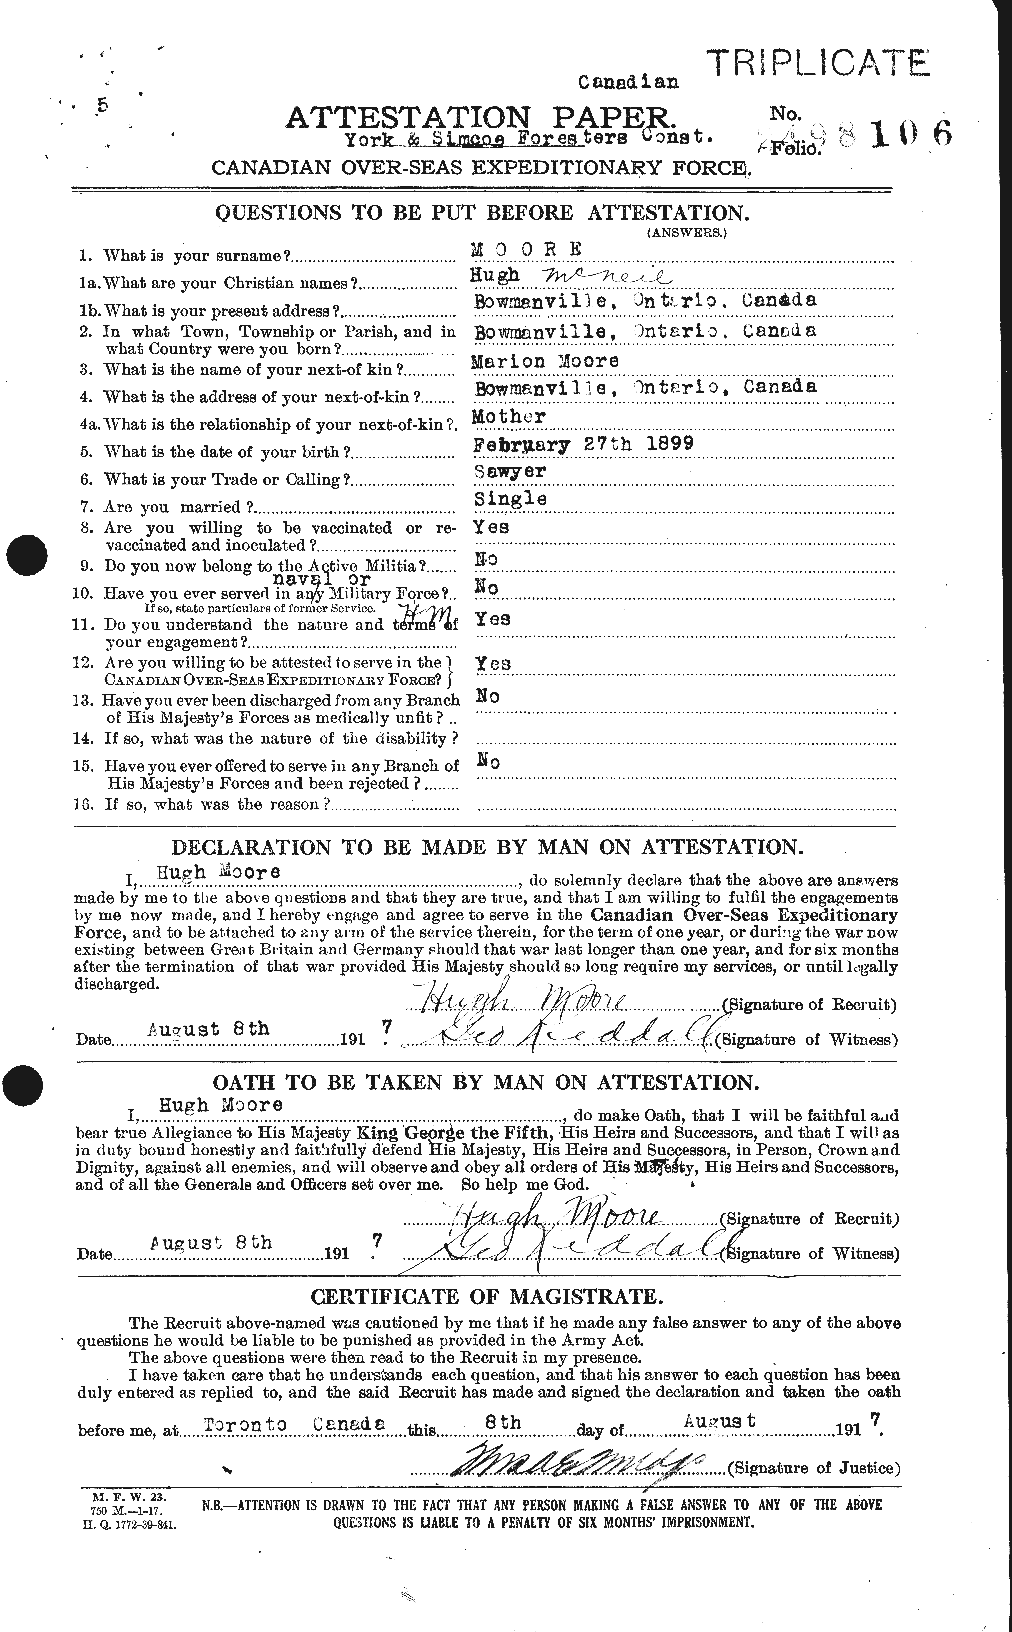 Personnel Records of the First World War - CEF 502152a